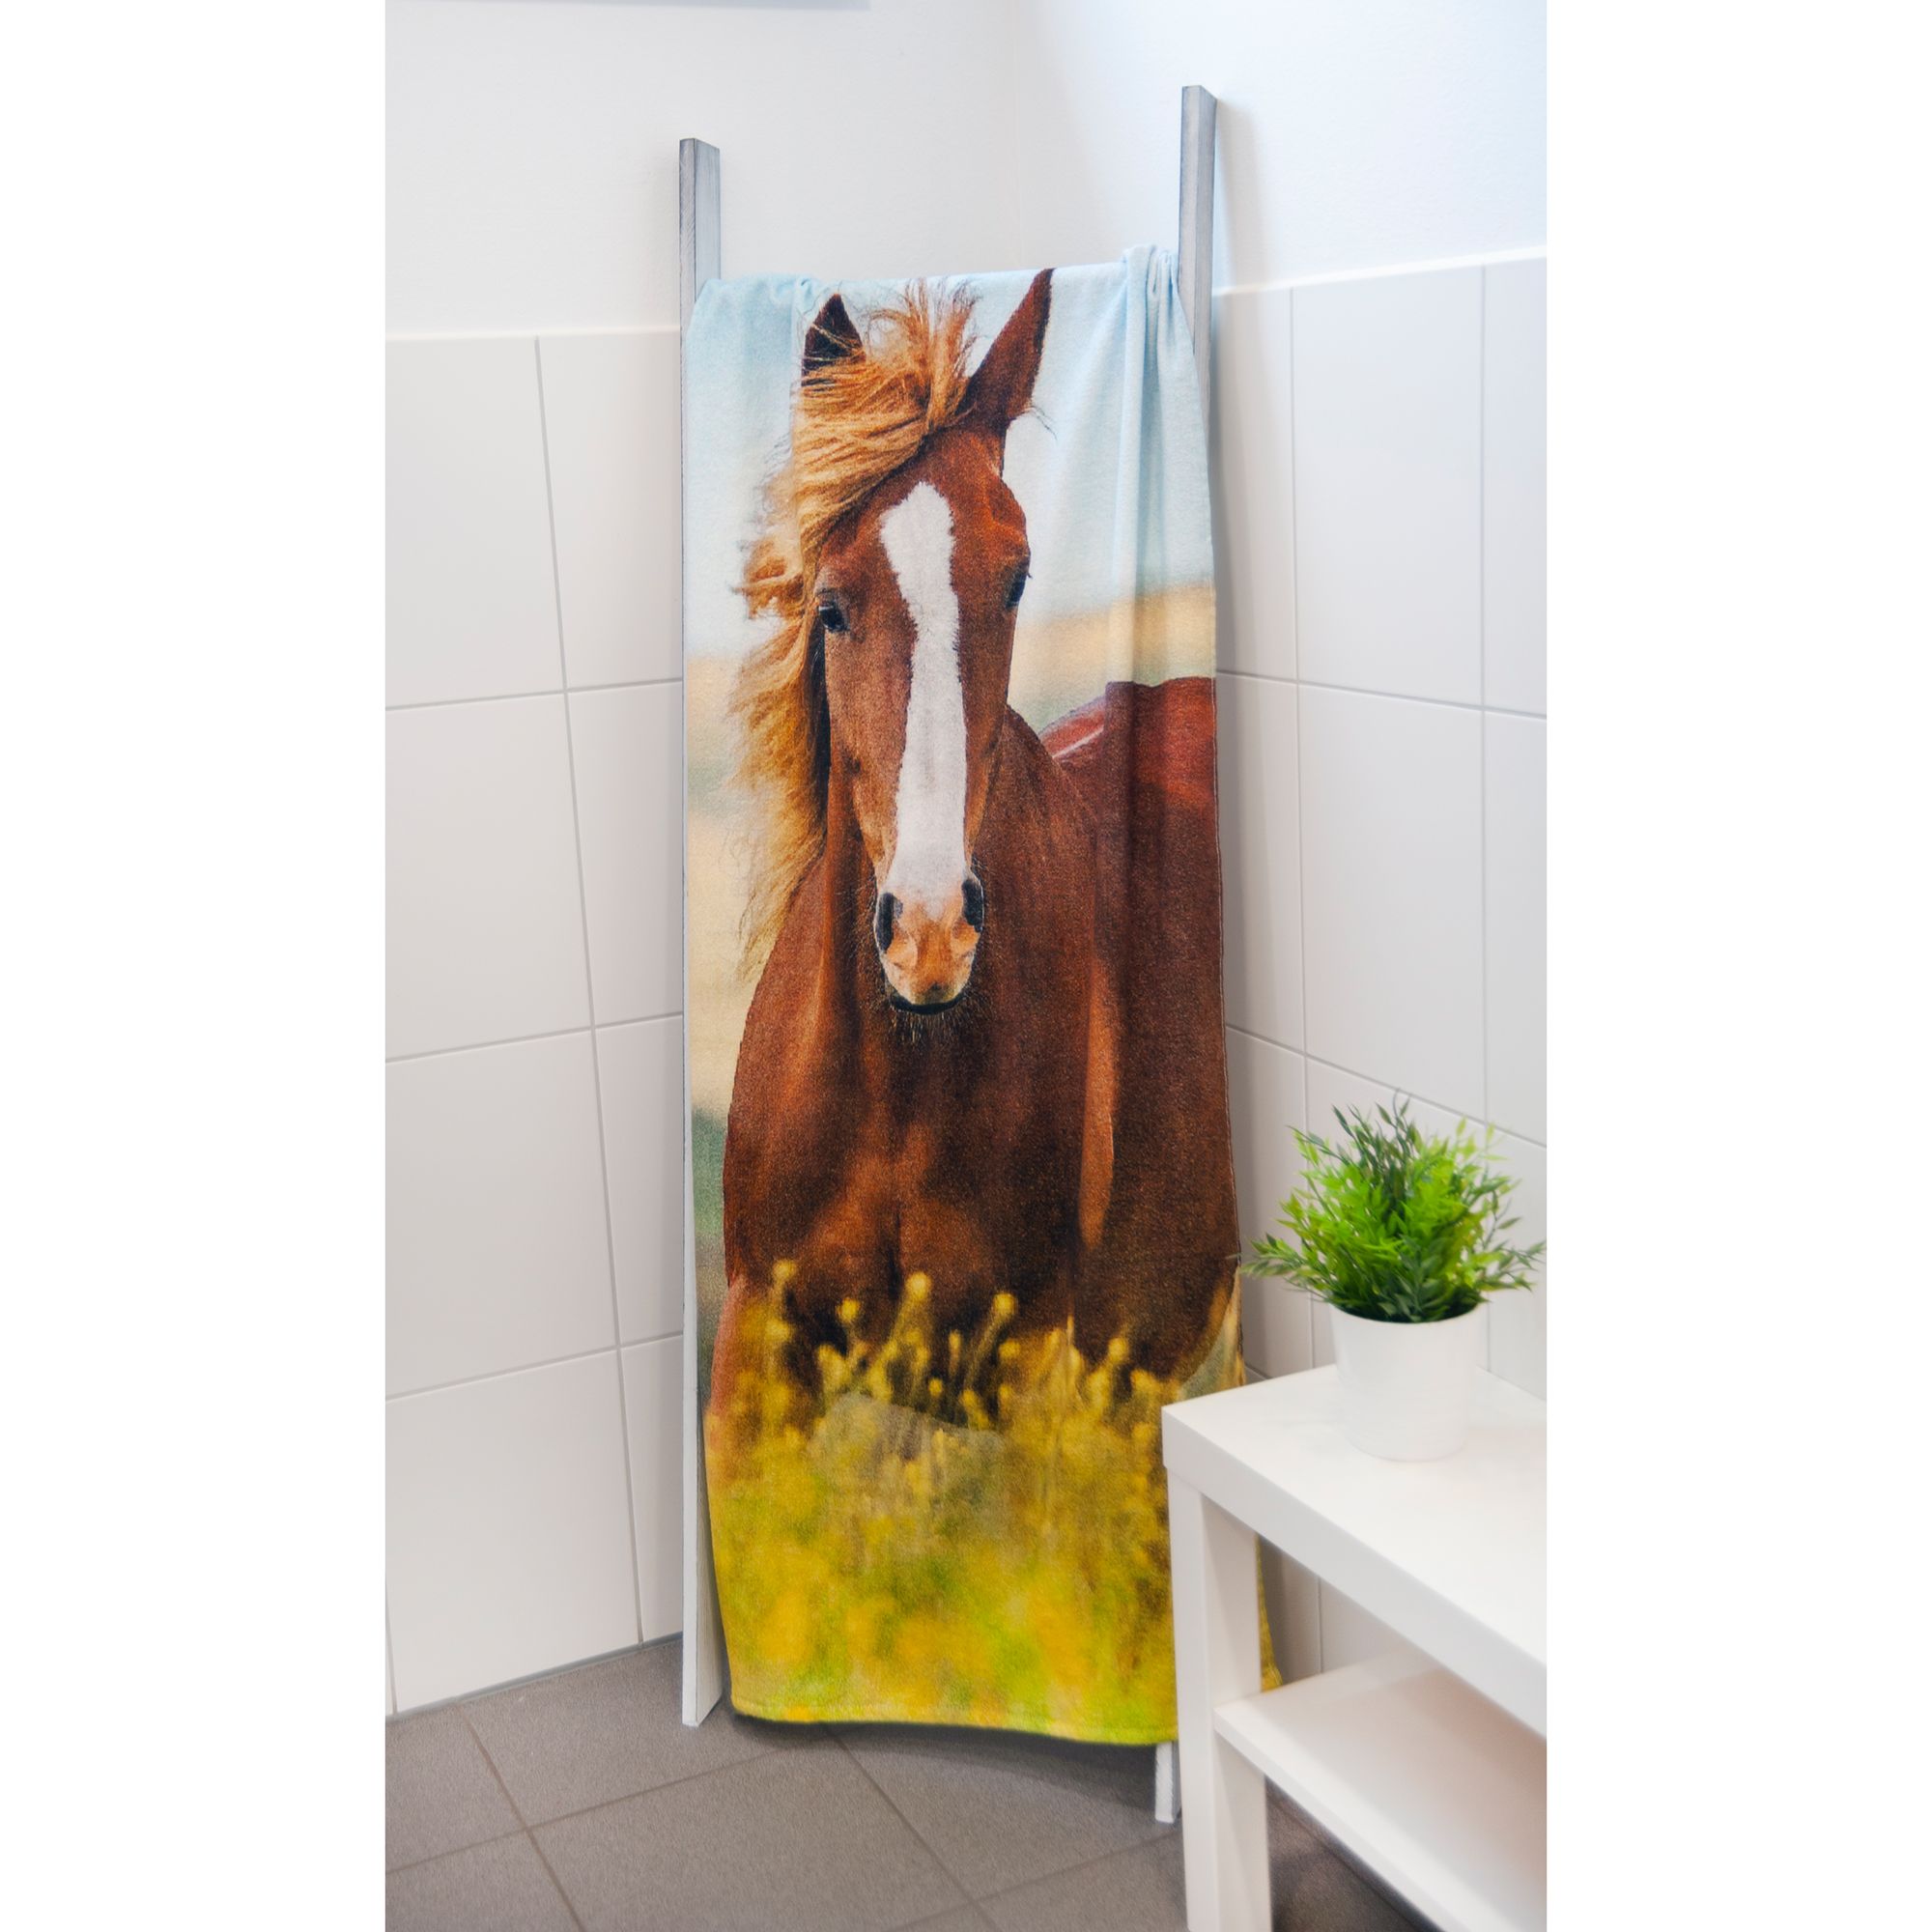 Bade-Strandtuch Baumwoll-Velours 75x150cm Pferde-Motiv Collection Young ca.